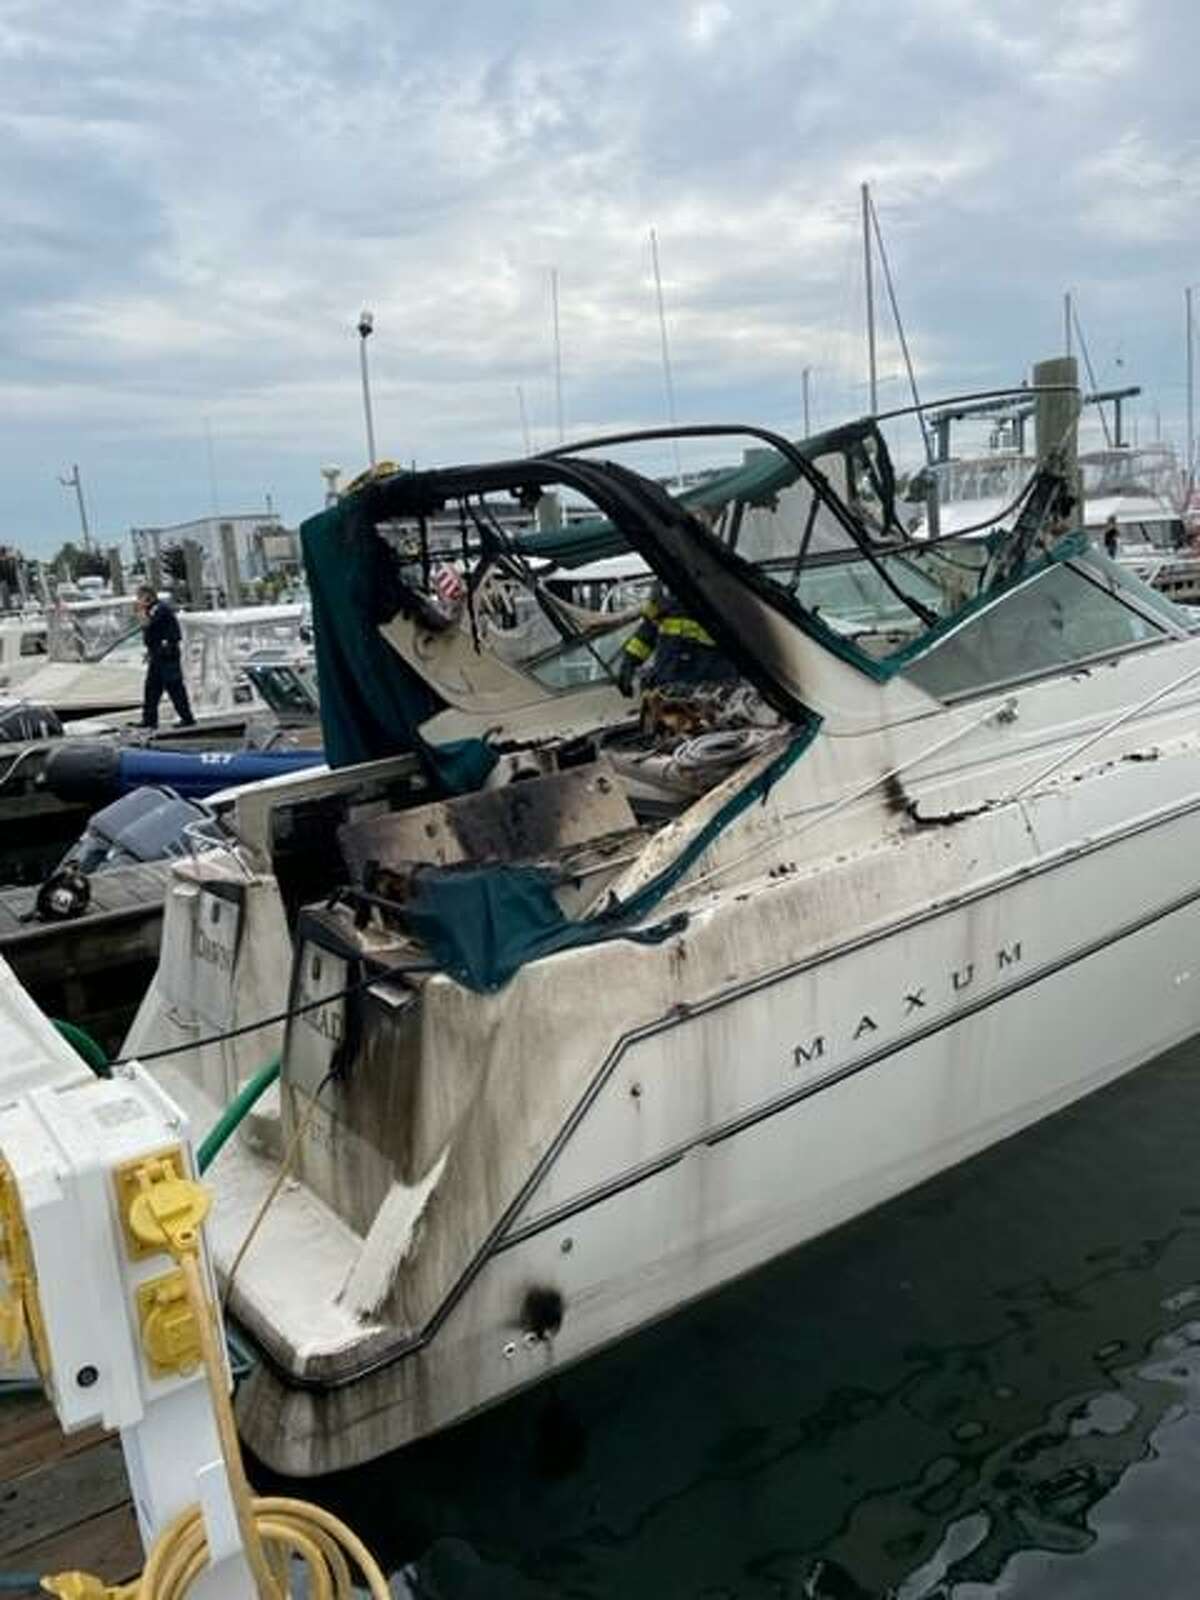 A man was sent to the hospital Friday afternoon after a boat fire at Cove Marina, according to the Norwalk Fire Department.